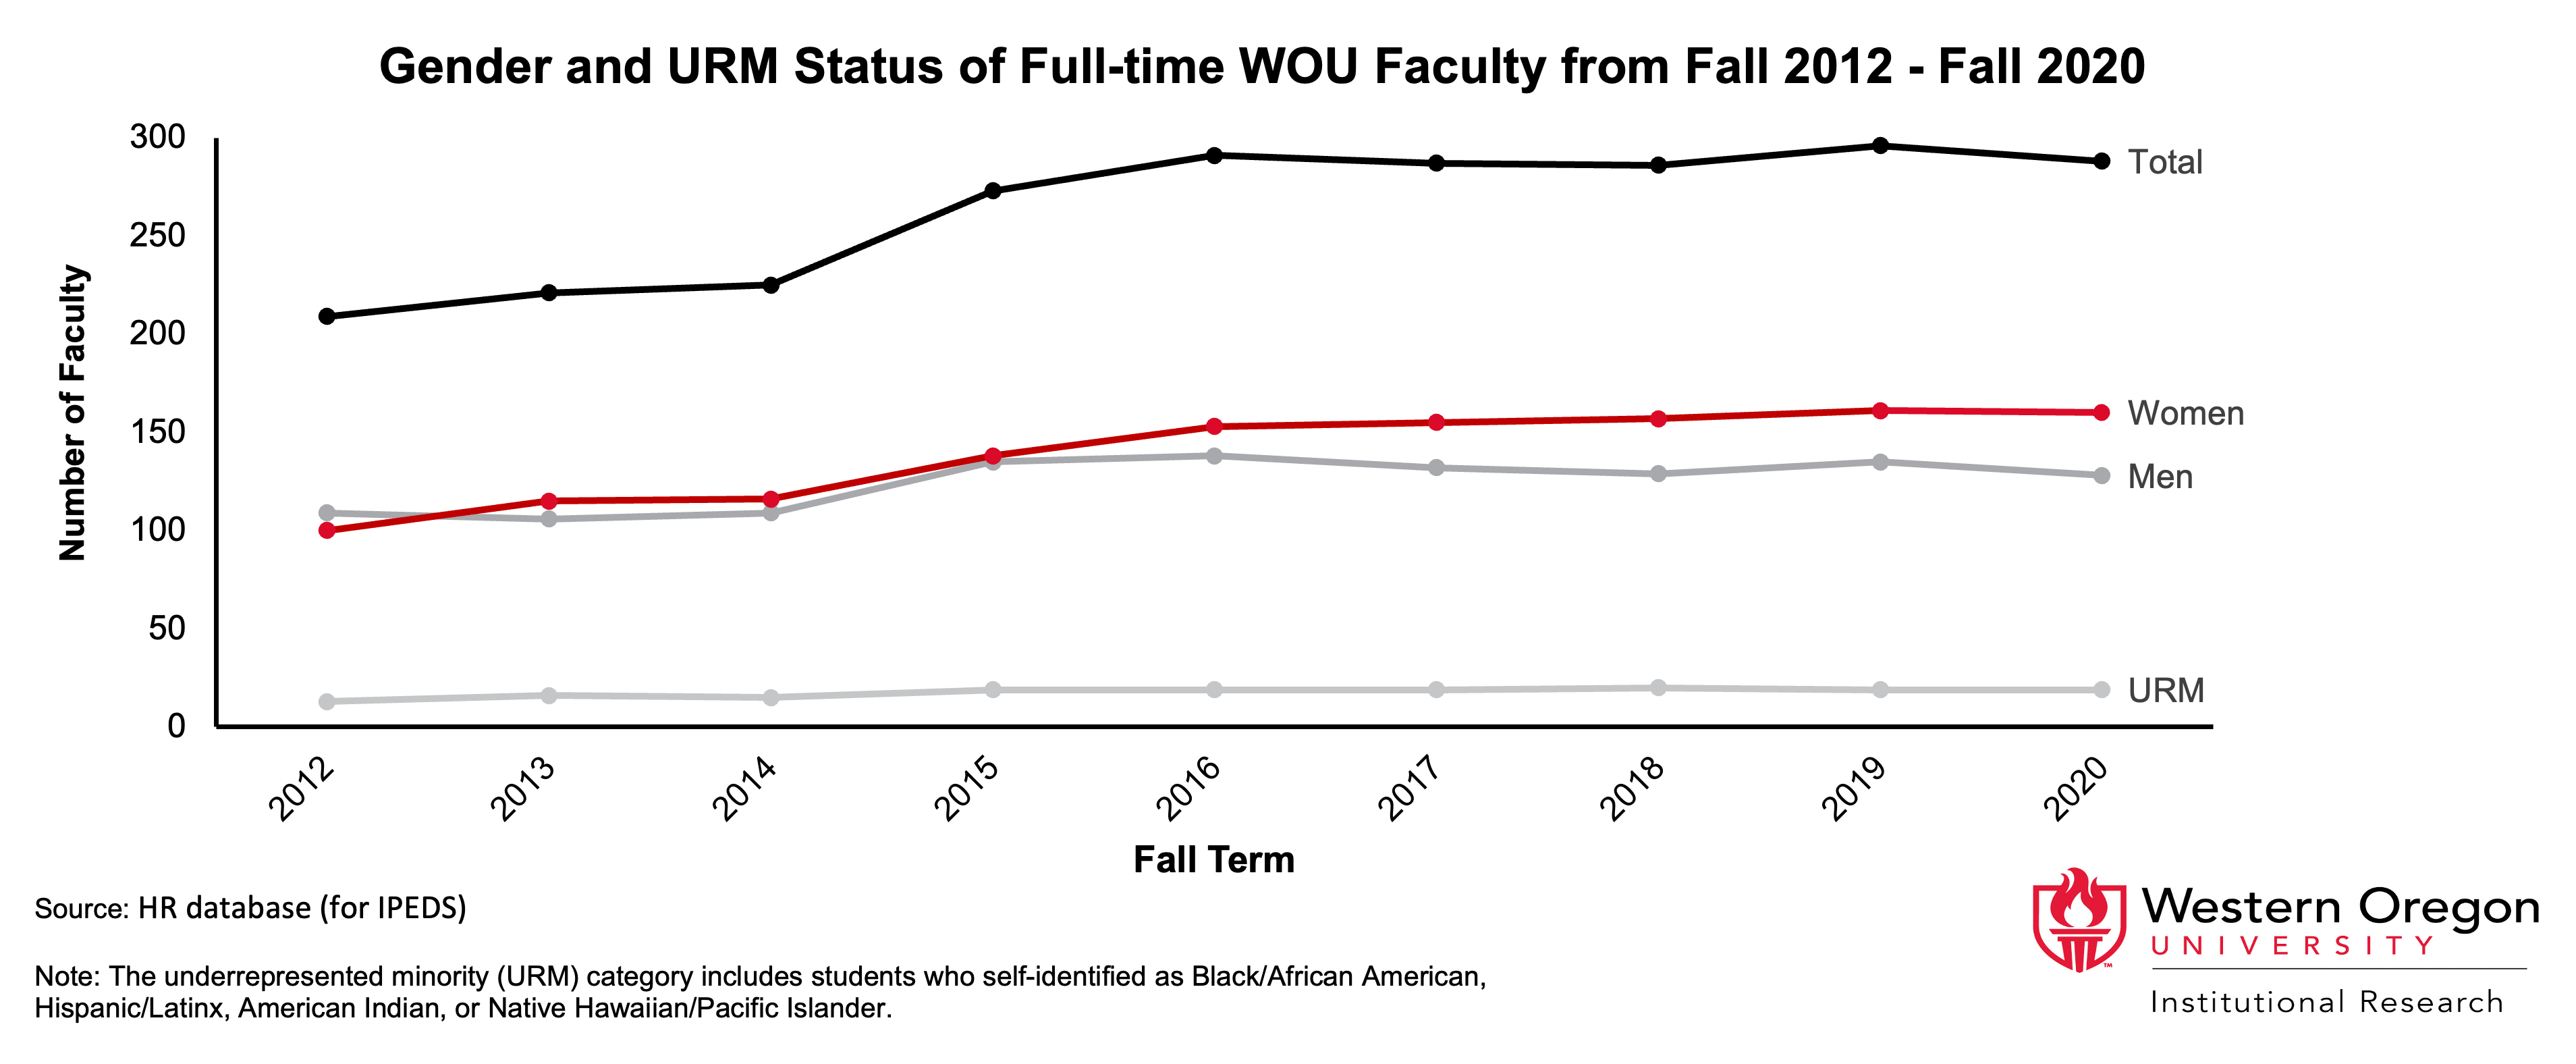 Line graph of gender and URM status of full-time WOU faculty from fall 2012 to fall 2020, showing that women outnumber men and that URM represent a small proportion of the total.